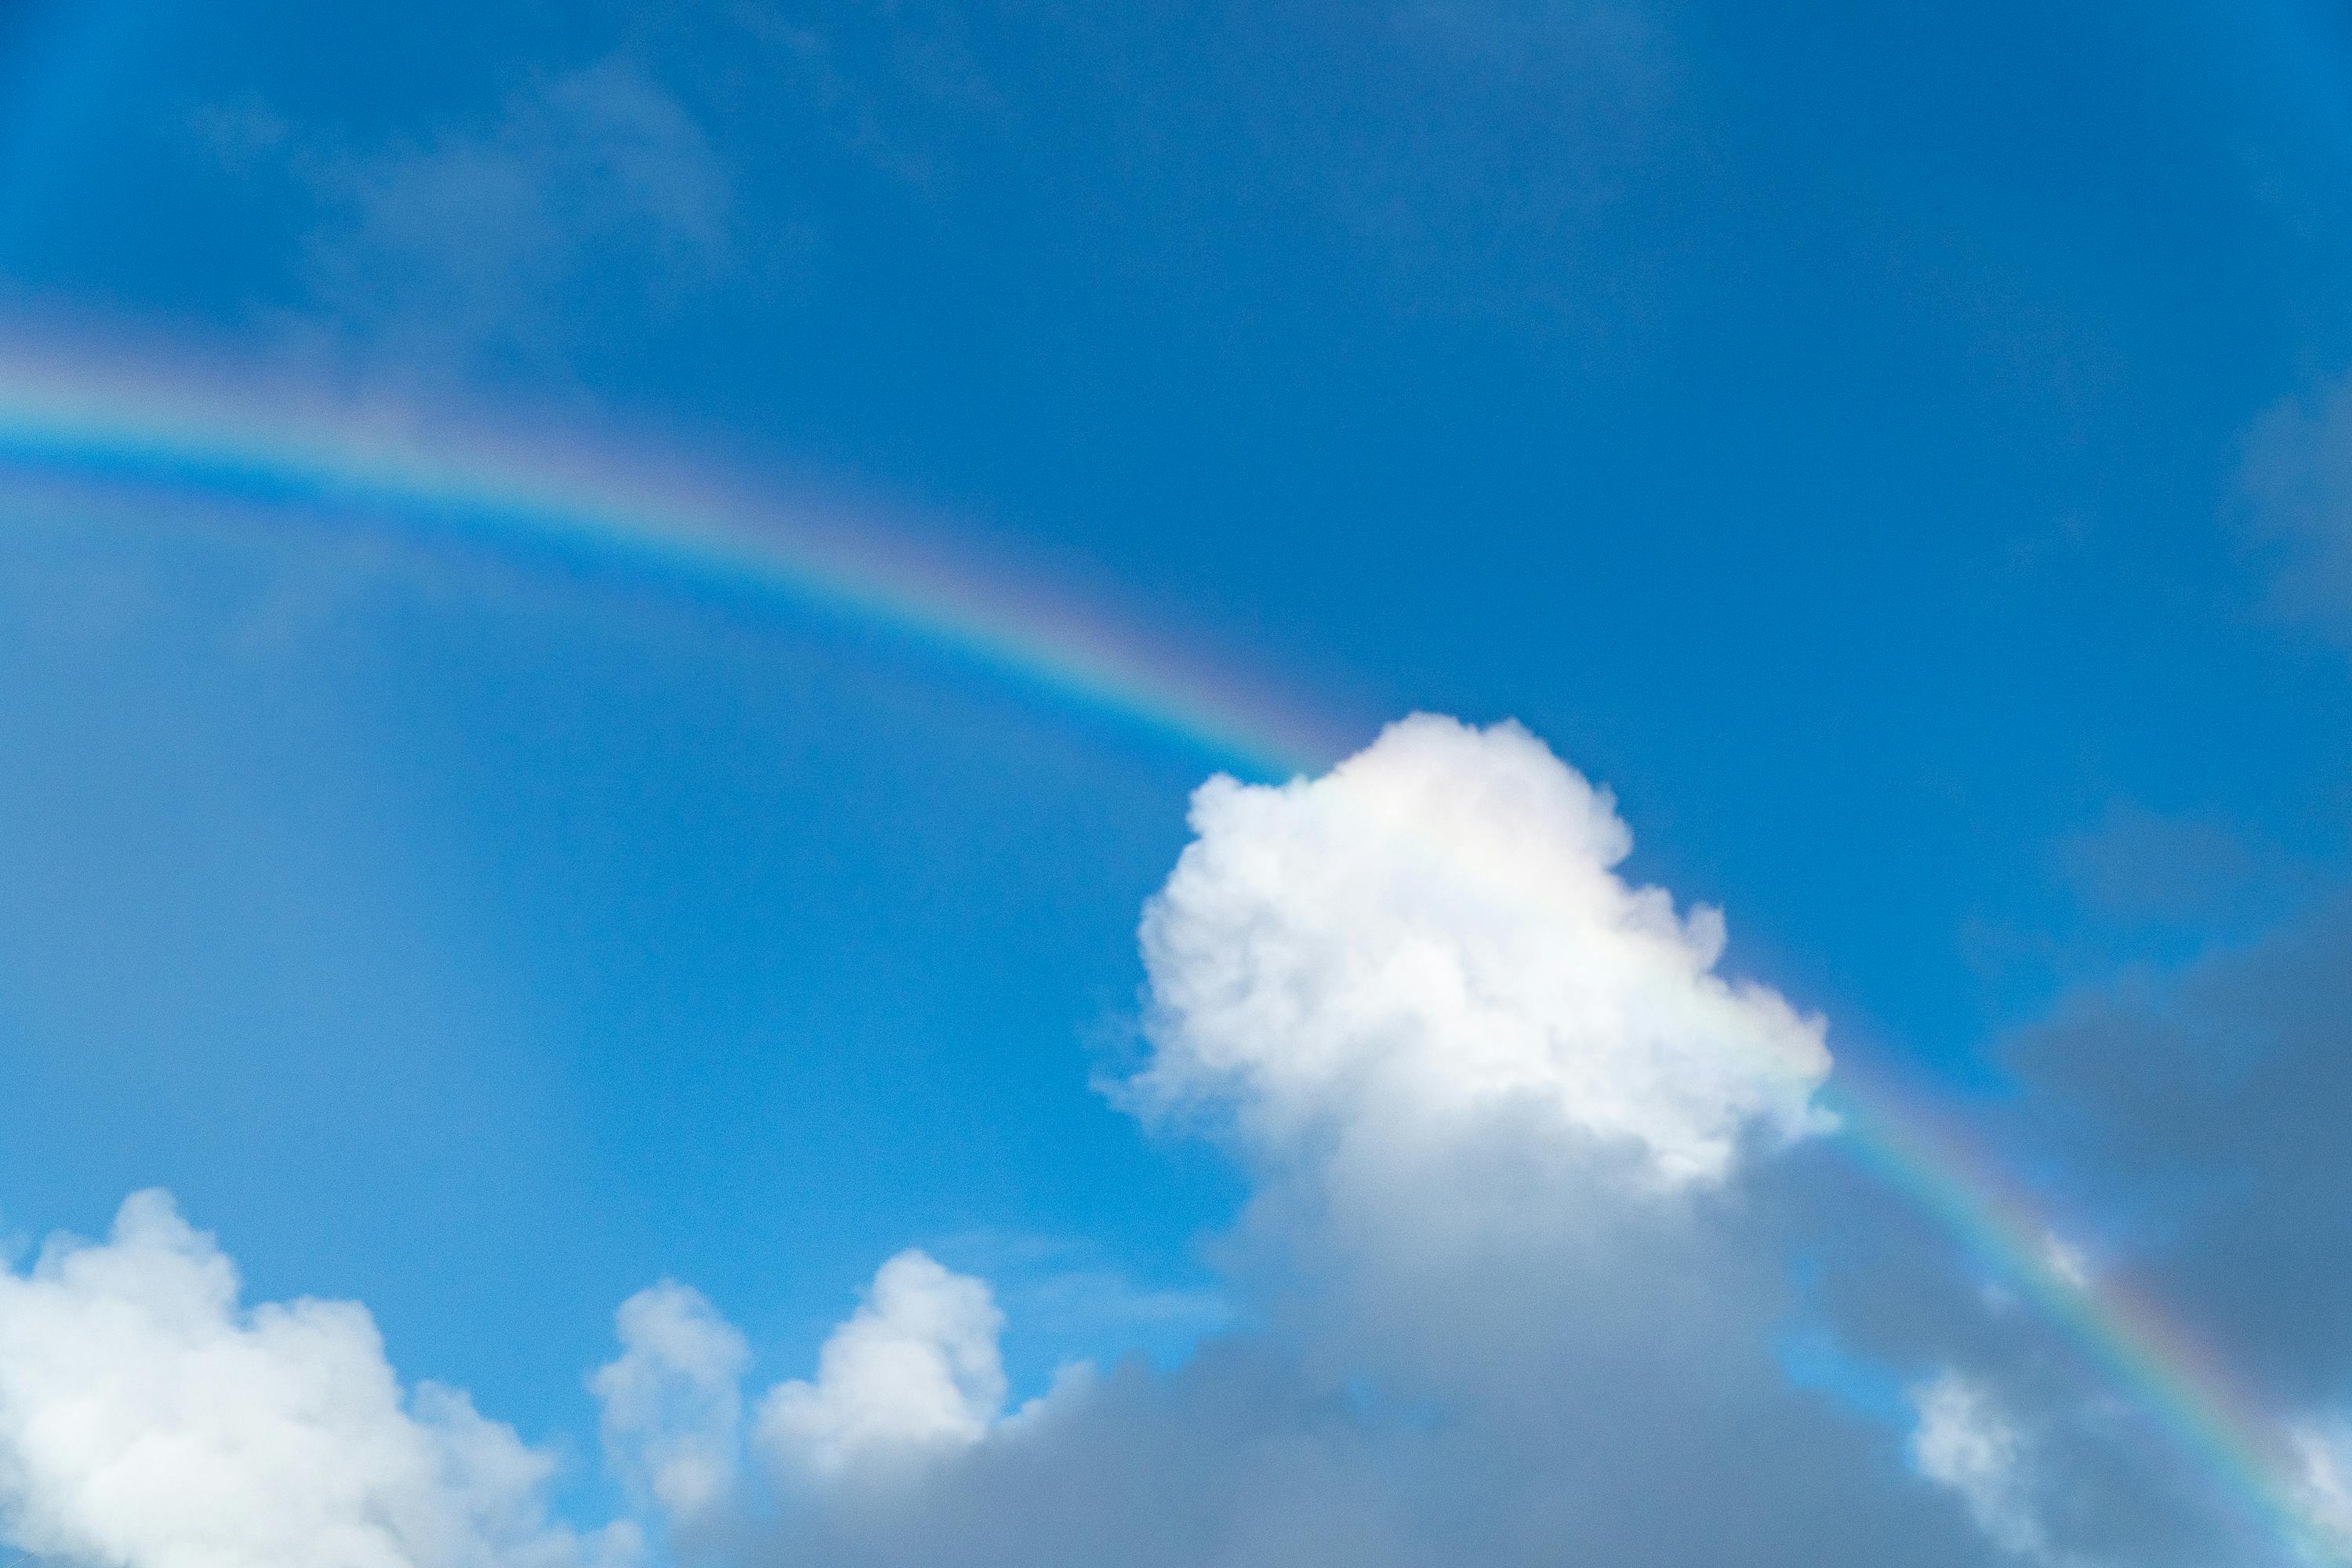 Clouds and Rainbow stock image. Image of focus, clouds - 36068497